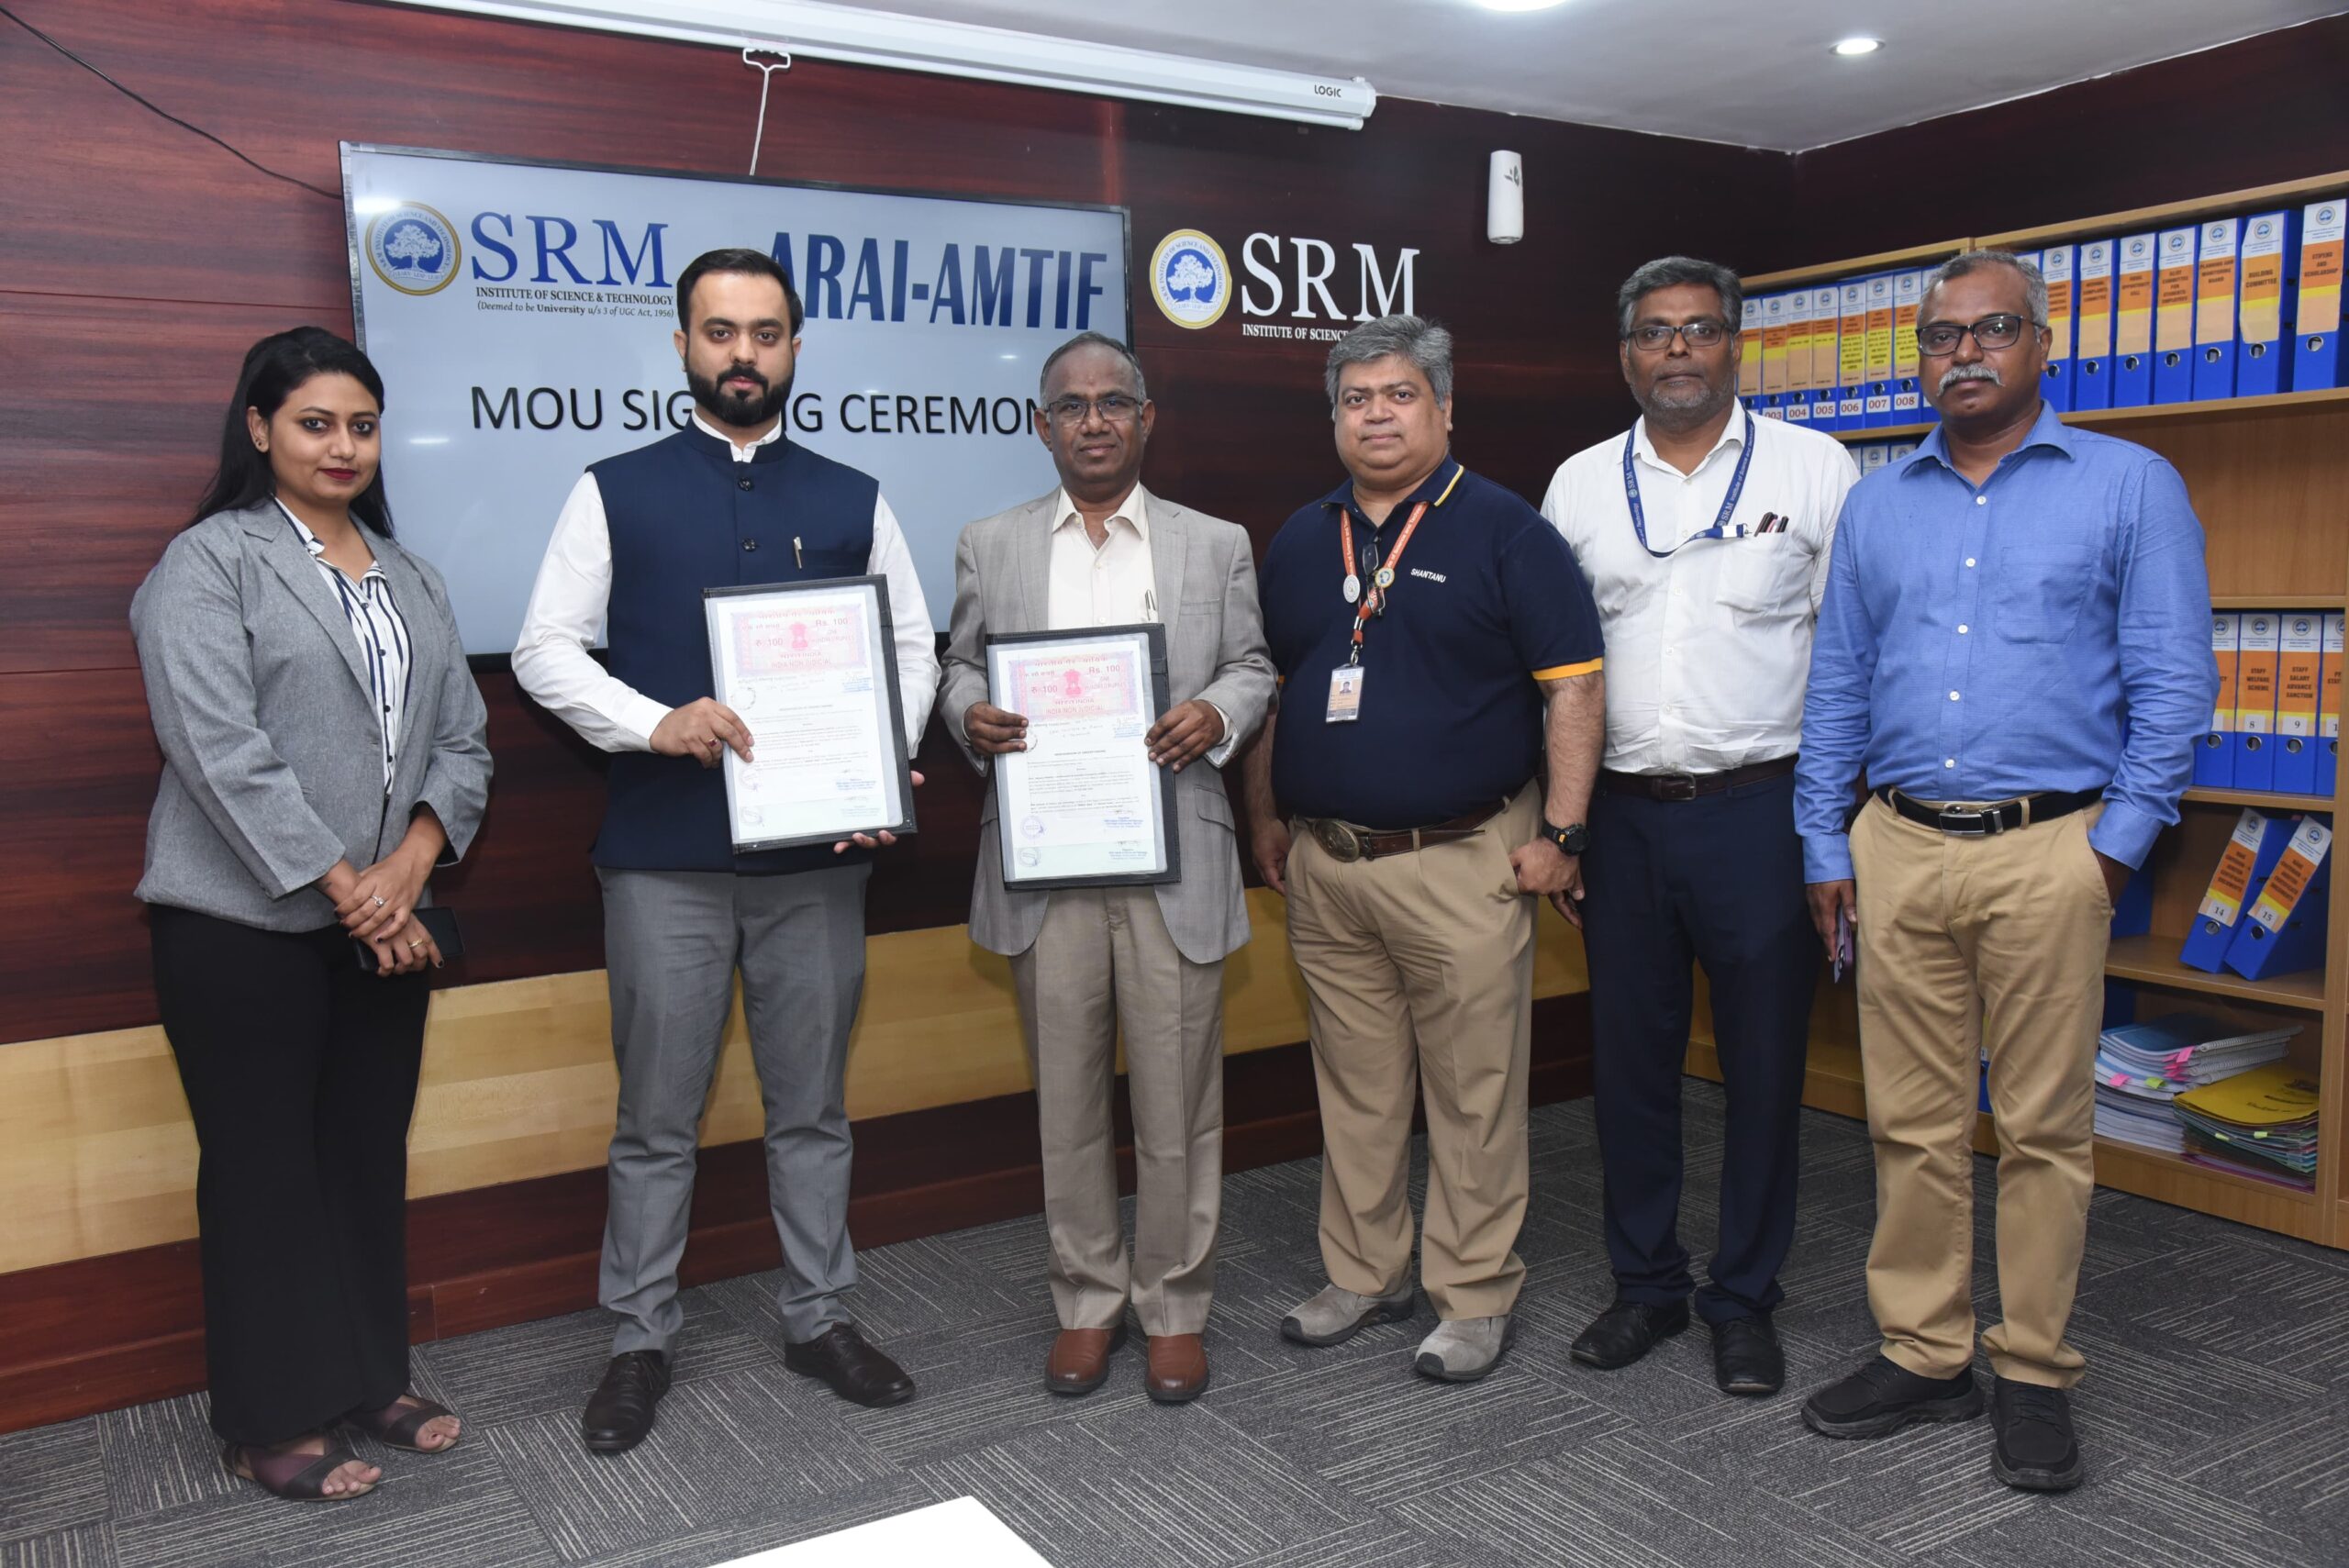 Tie-up will enhance skills, drive research, foster advancements in mobility & allied tech. domains SRMIST, ARAI-AMTIF sign pact to promote innovation, help in creating Startups